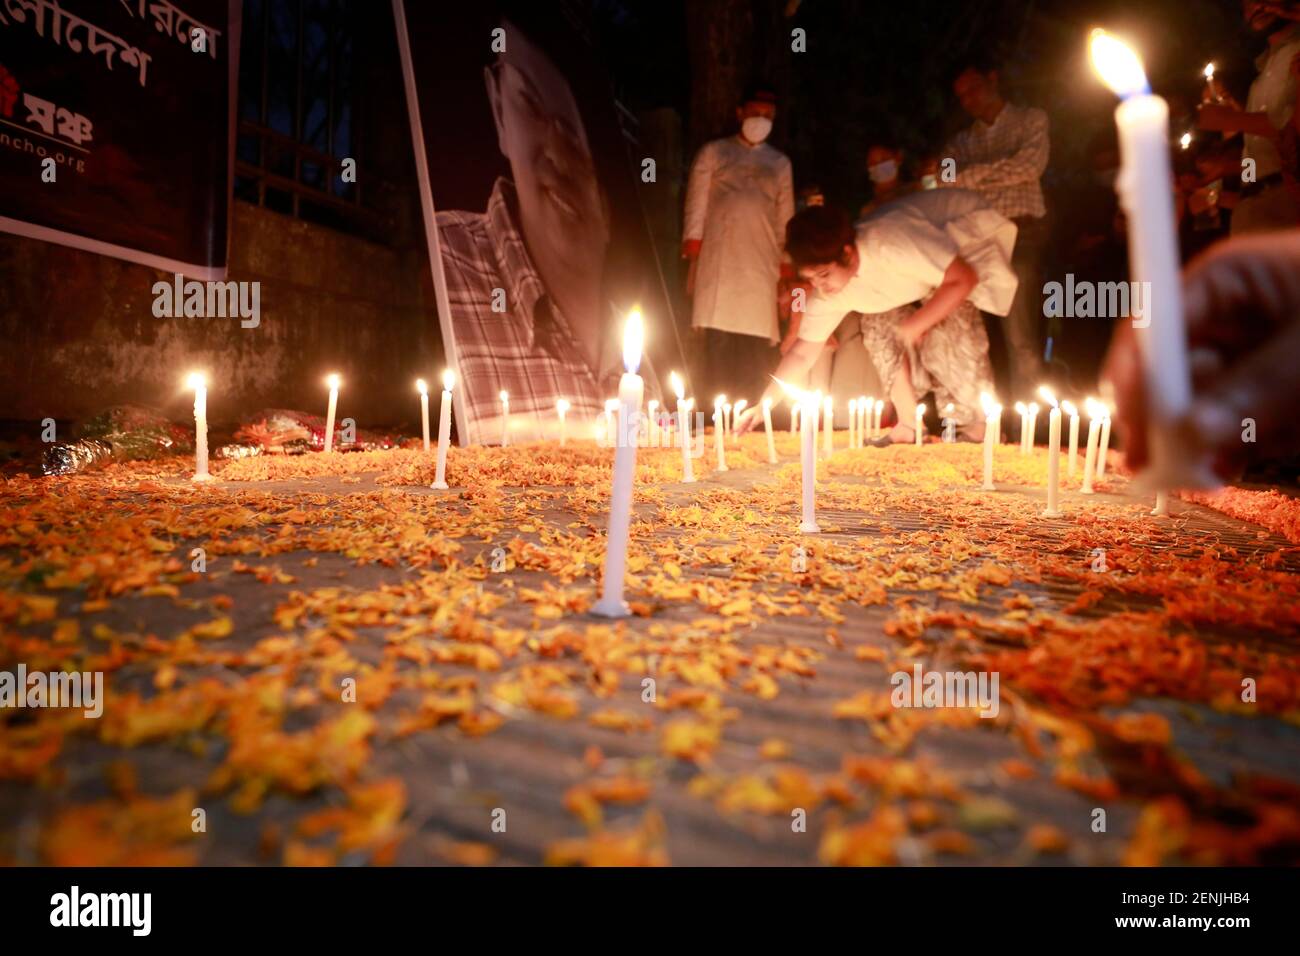 Dhaka, Bangladesh - February 26, 2021: People gather in Dhaka to lighting a candle remembering the murder of the Bangladeshi American blogger, writer Stock Photo